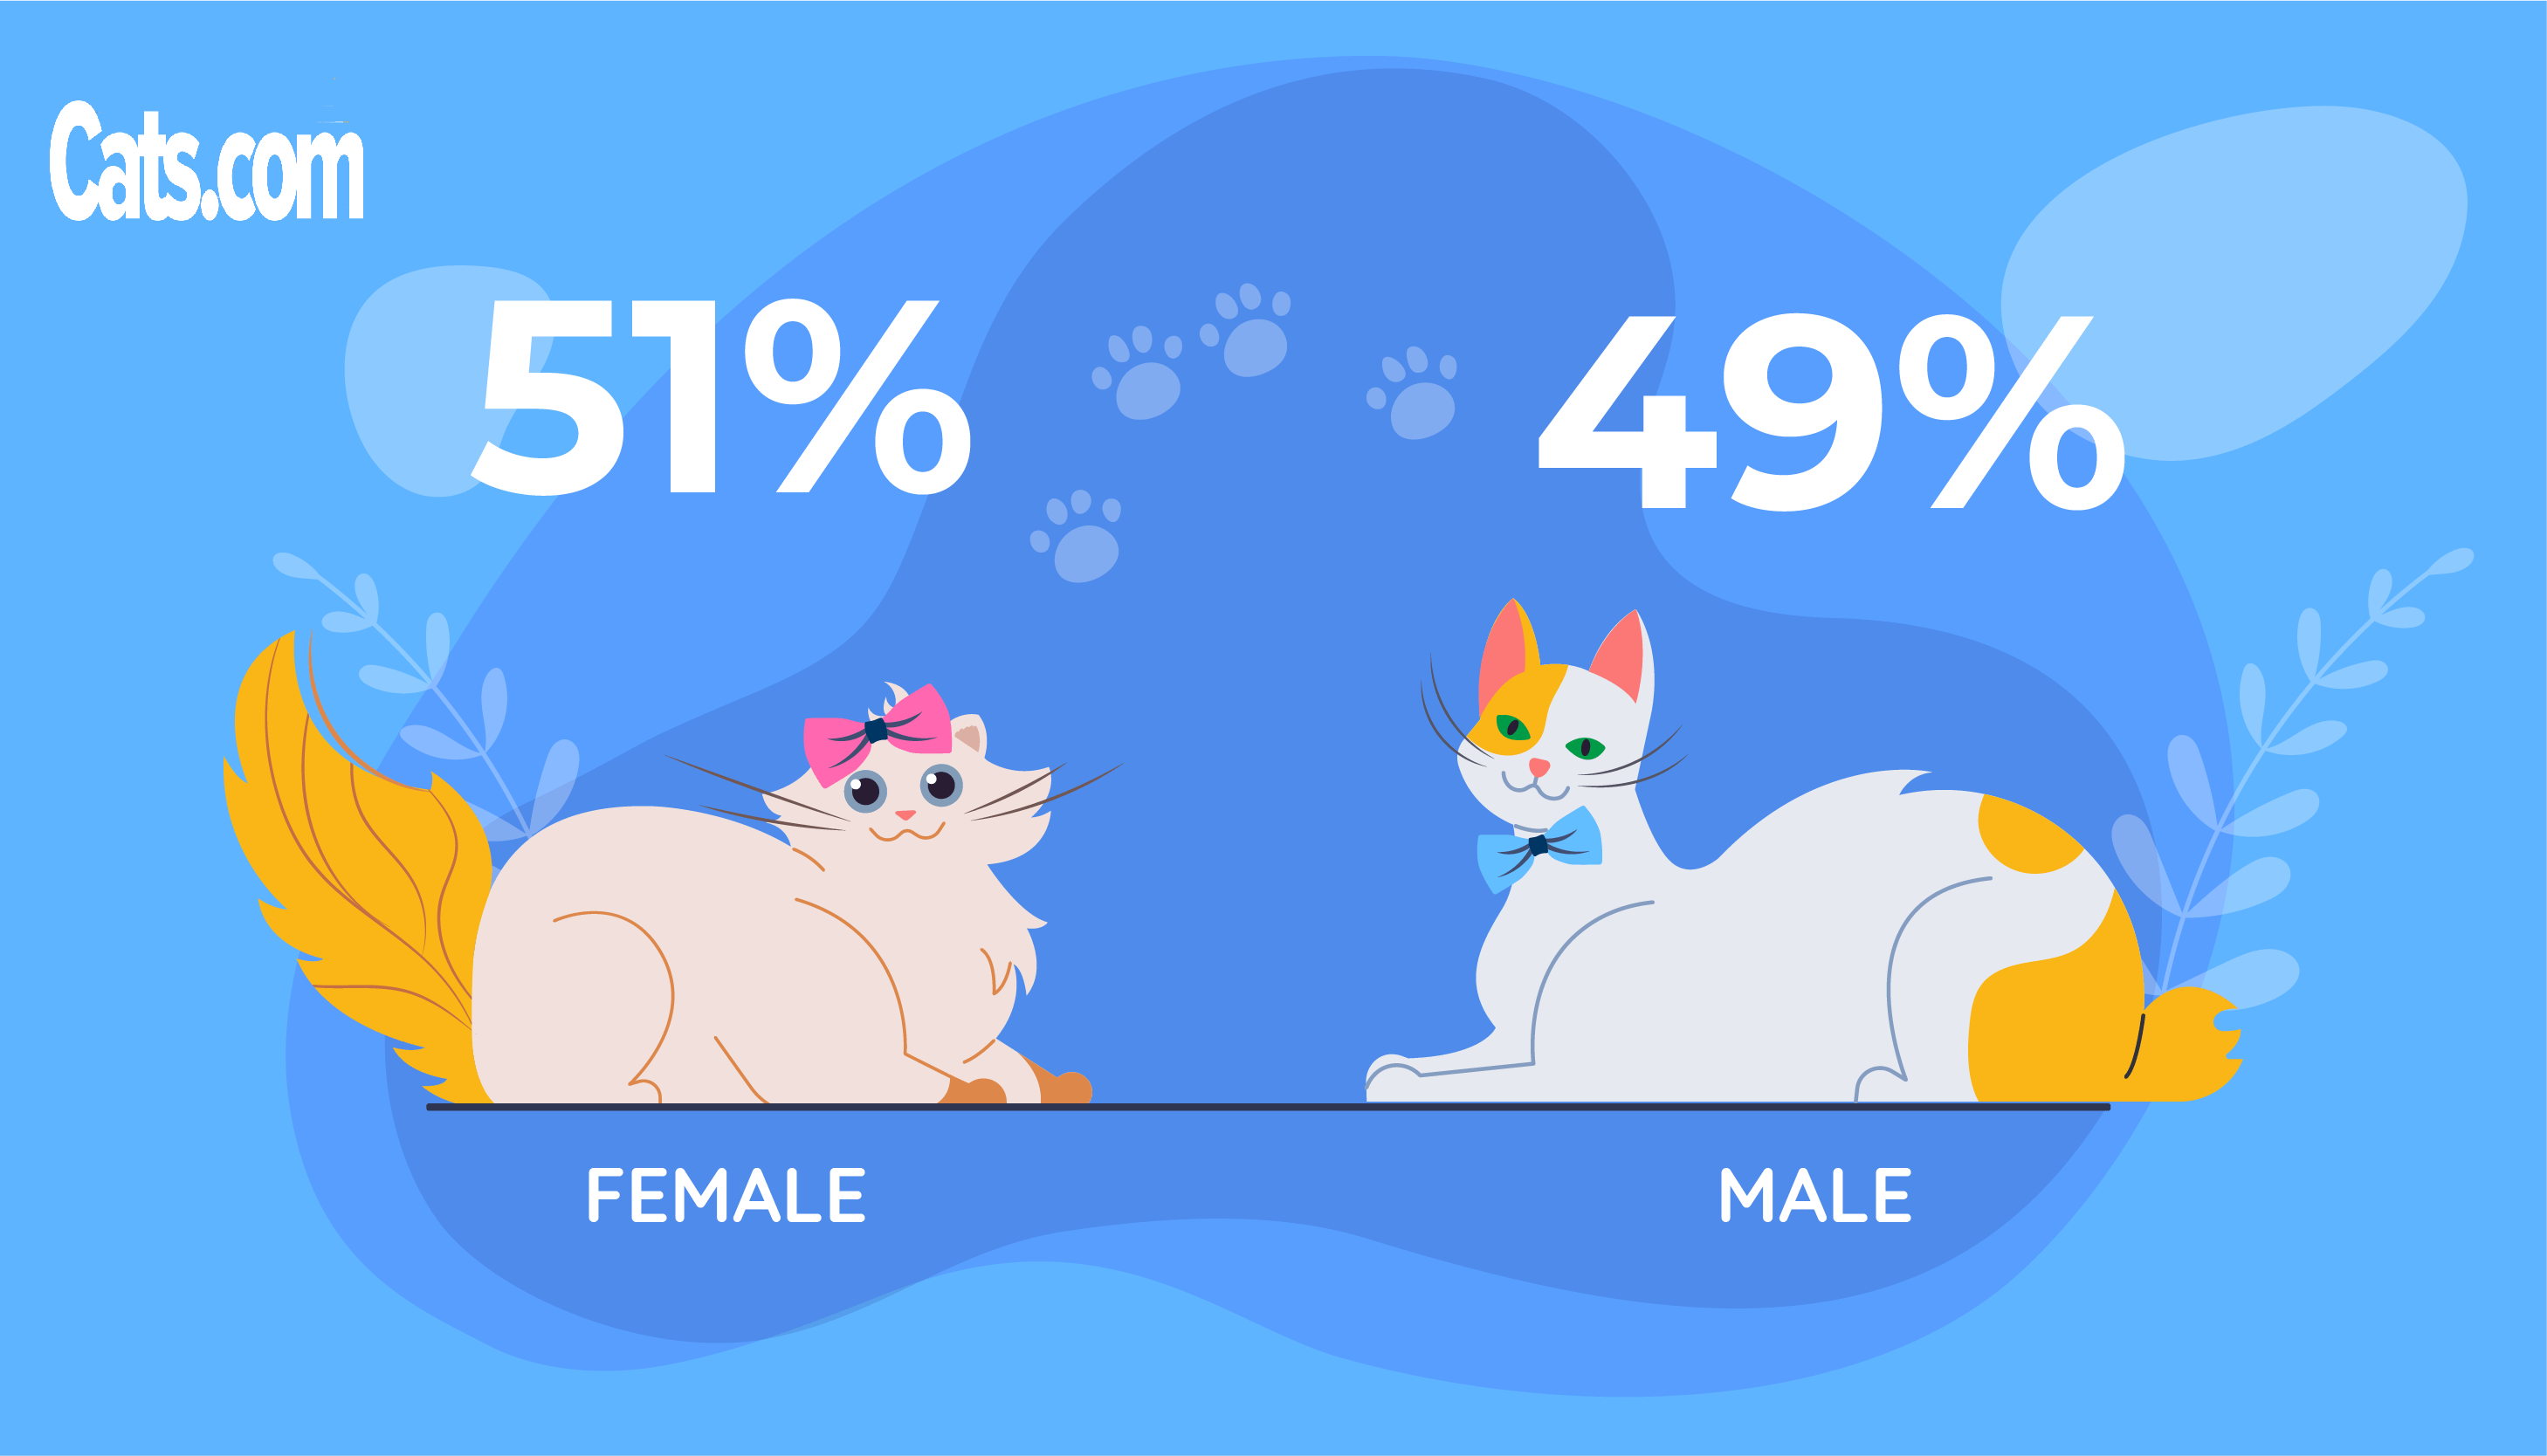 A-Z of Cat Facts and Statistics Family Gender